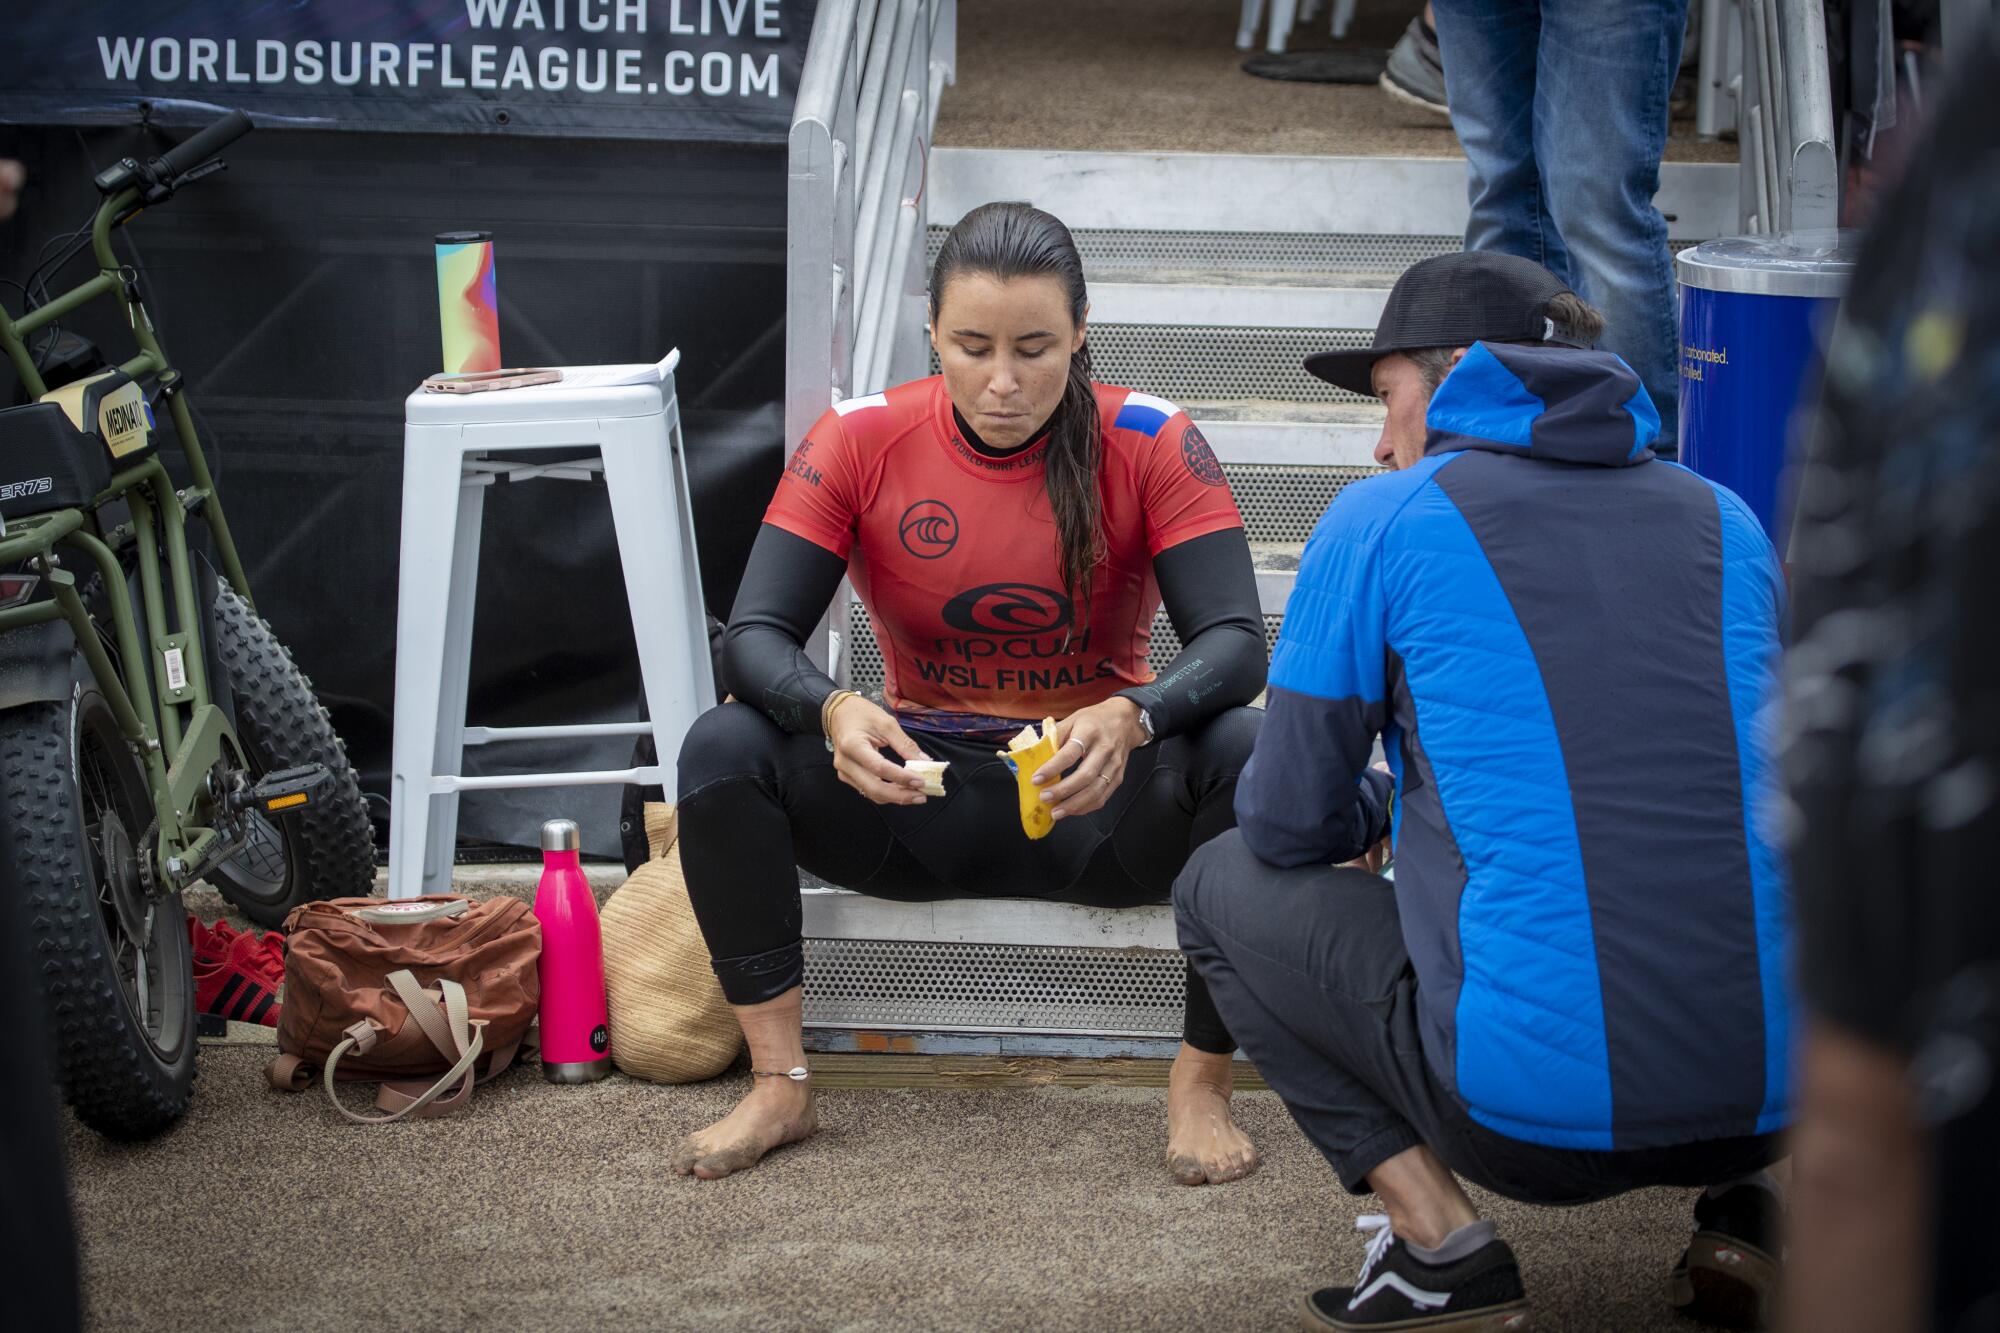 Johanne Defay rests after beating seven-time WSL champion Stephanie Gilmore 